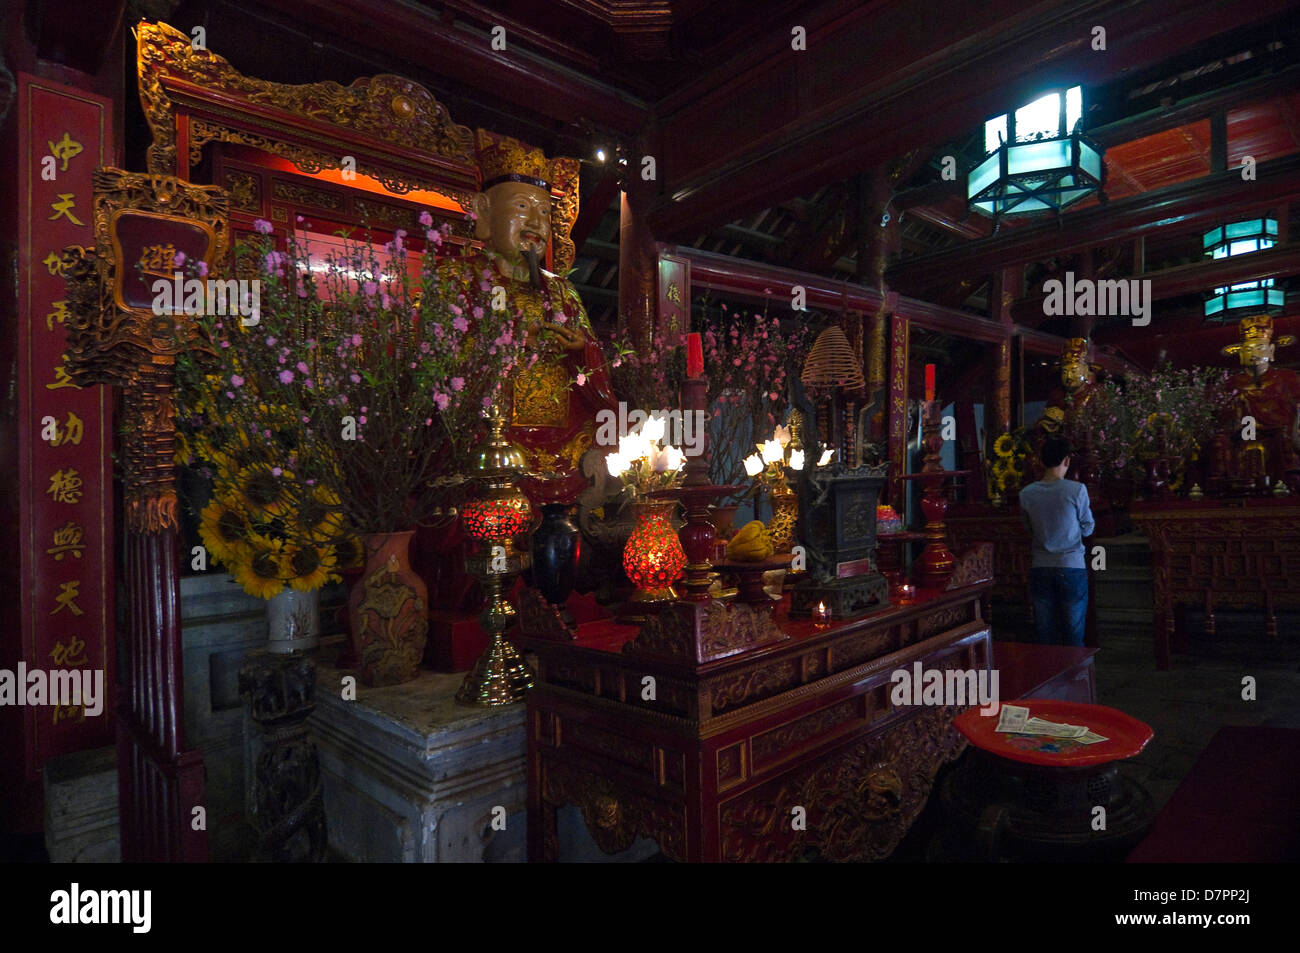 Horizontal interior of the House of Ceremonies, Bai Duong, at the Temple of Literature in Hanoi on a sunny day. Stock Photo